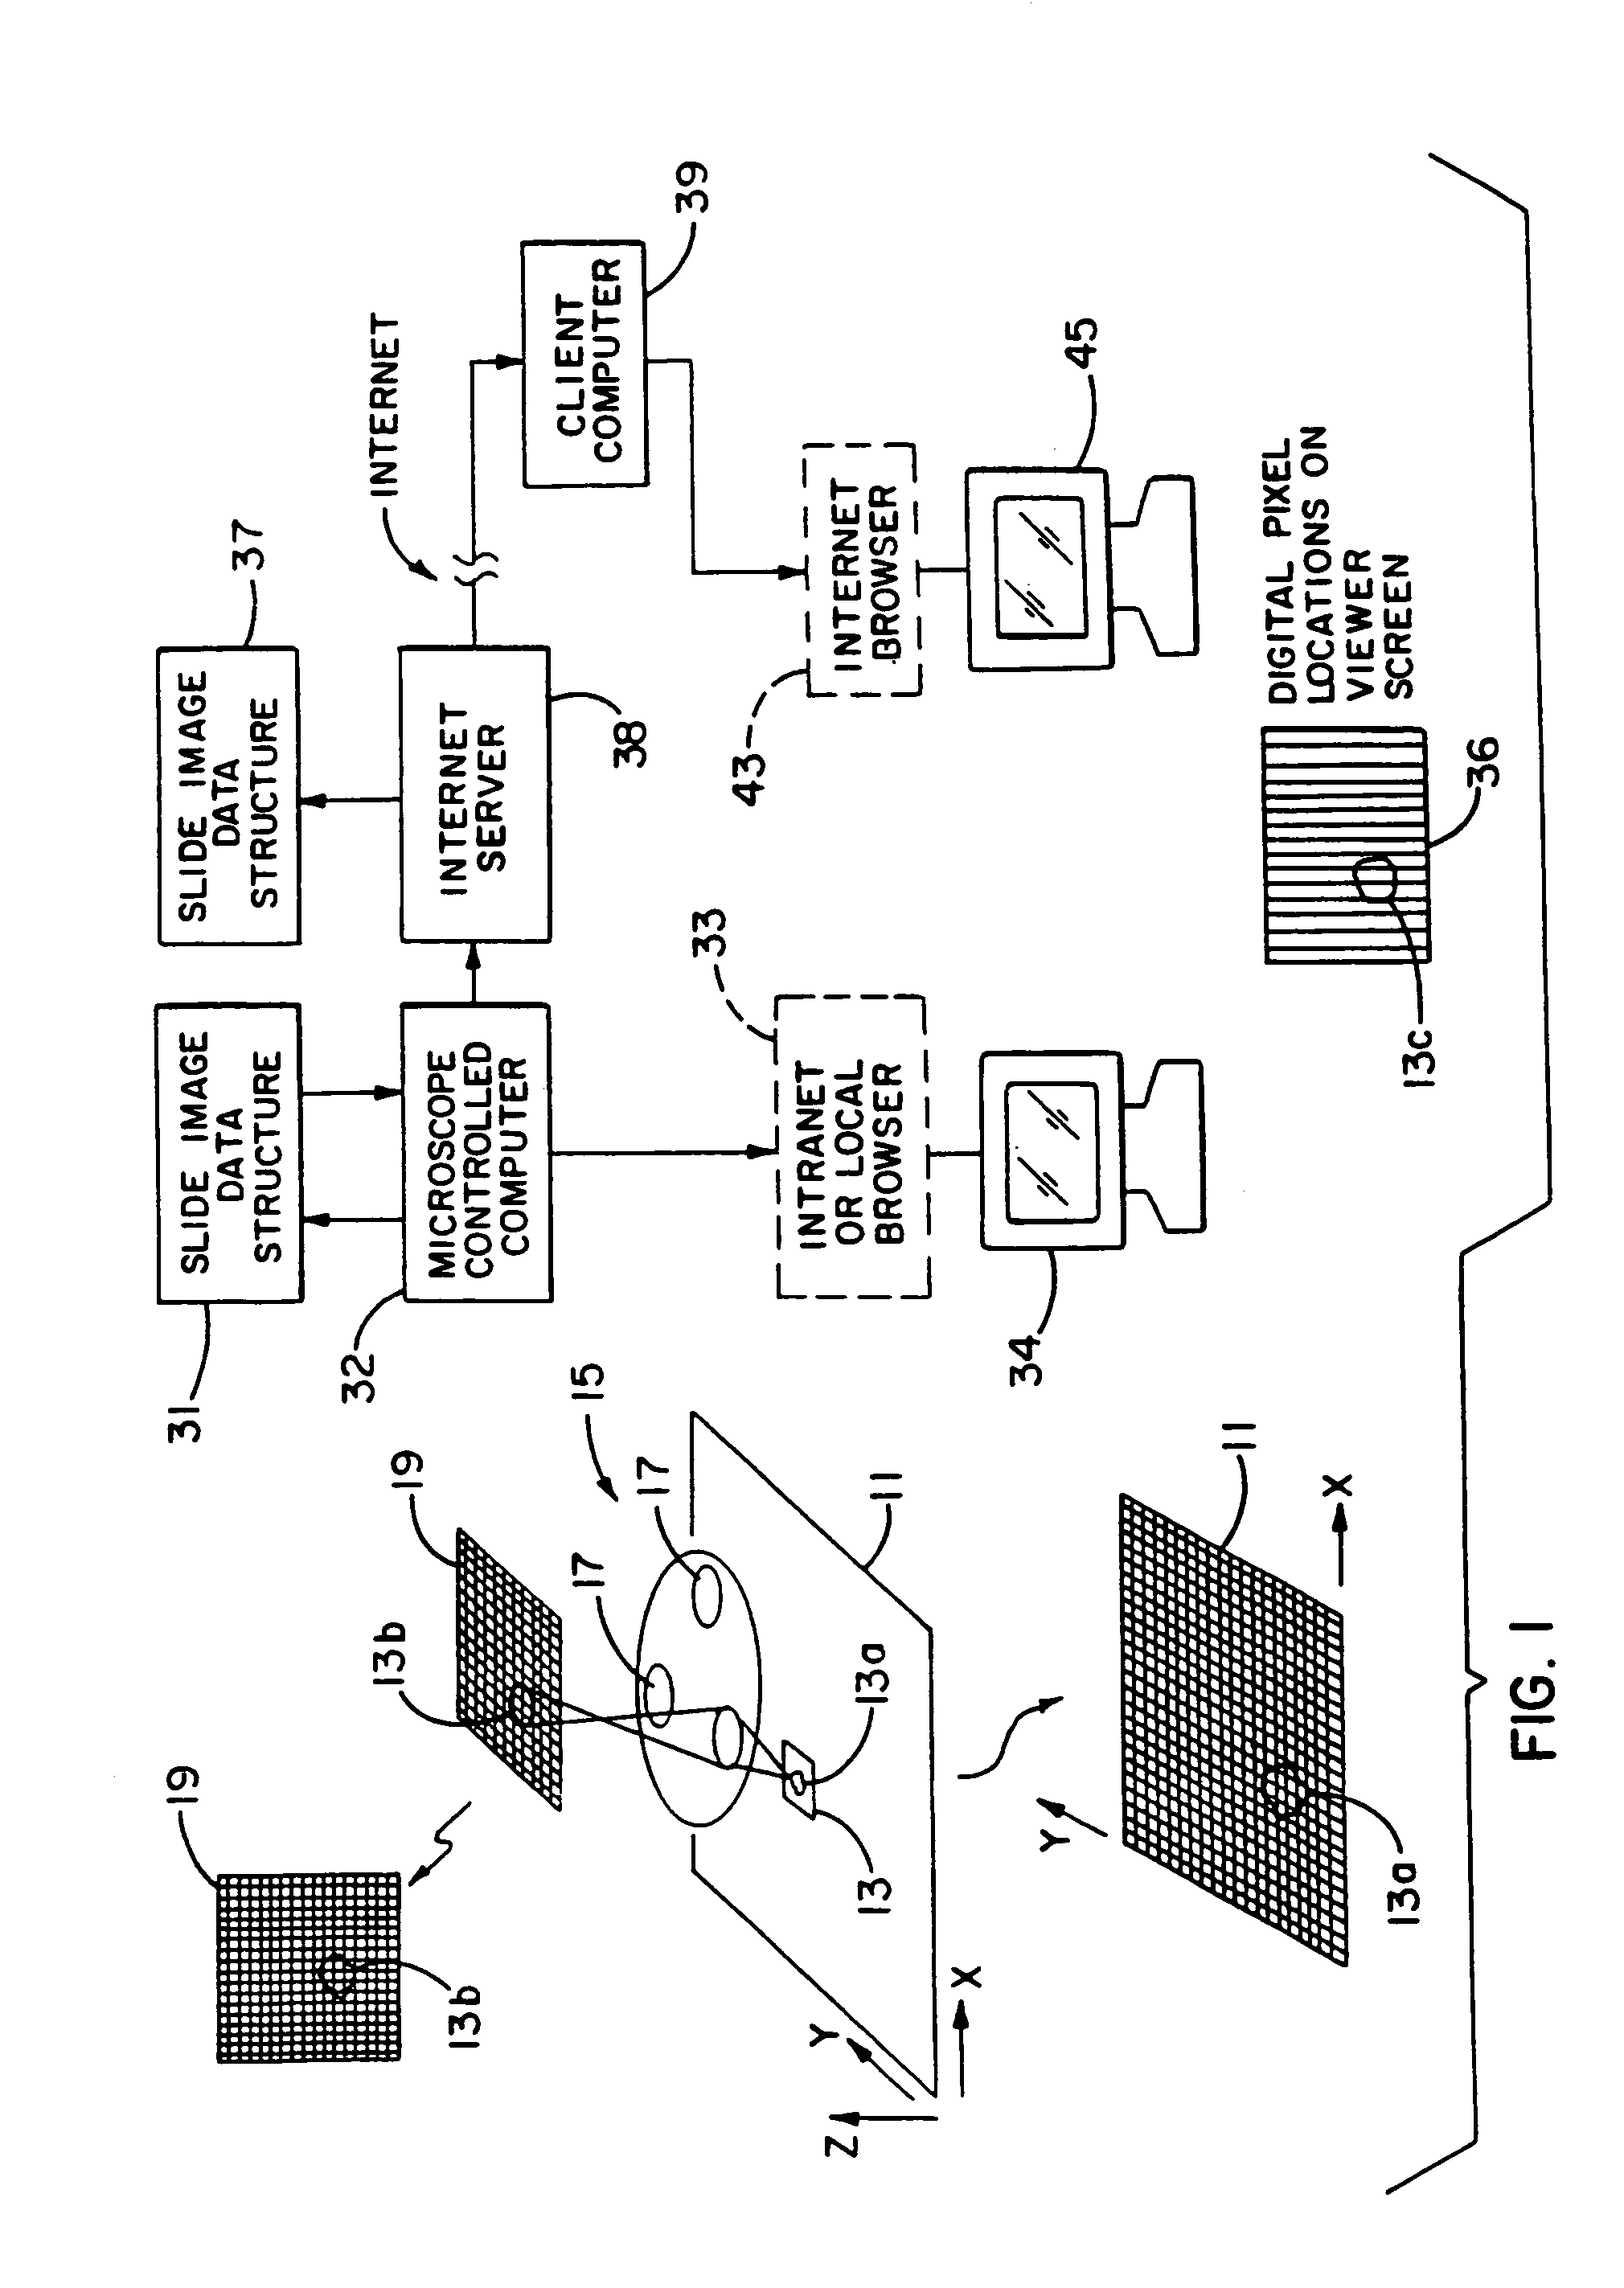 Method and apparatus for internet, intranet, and local viewing of virtual microscope slides